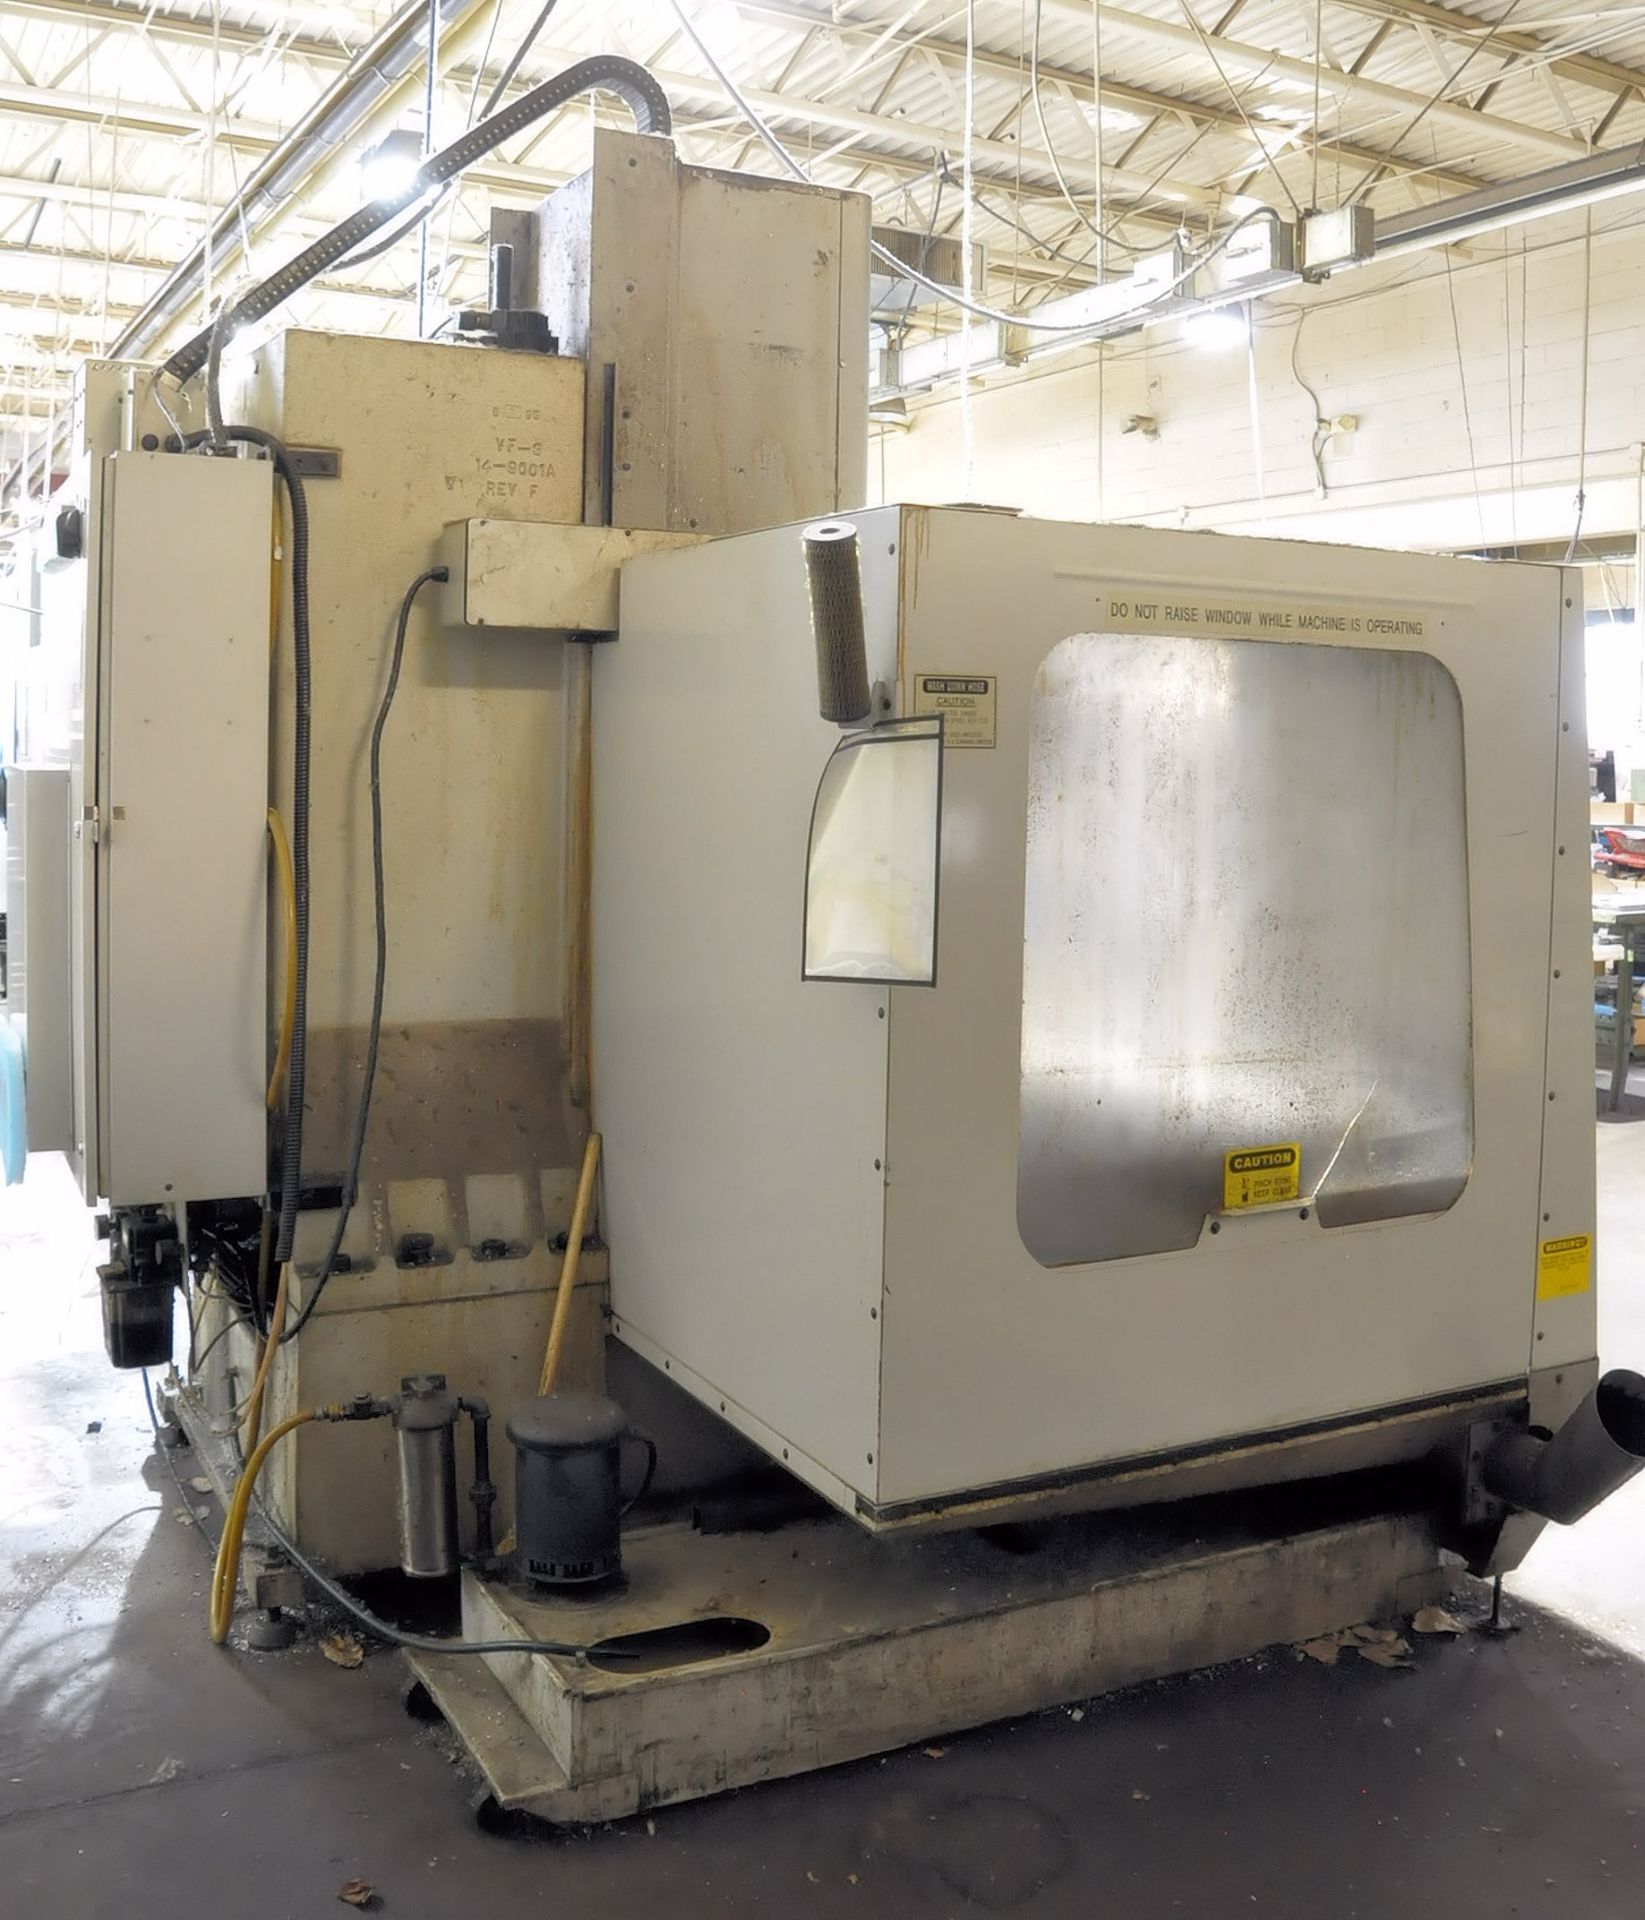 Haas VF-4 CNC Vertical Machining Center - Image 6 of 8